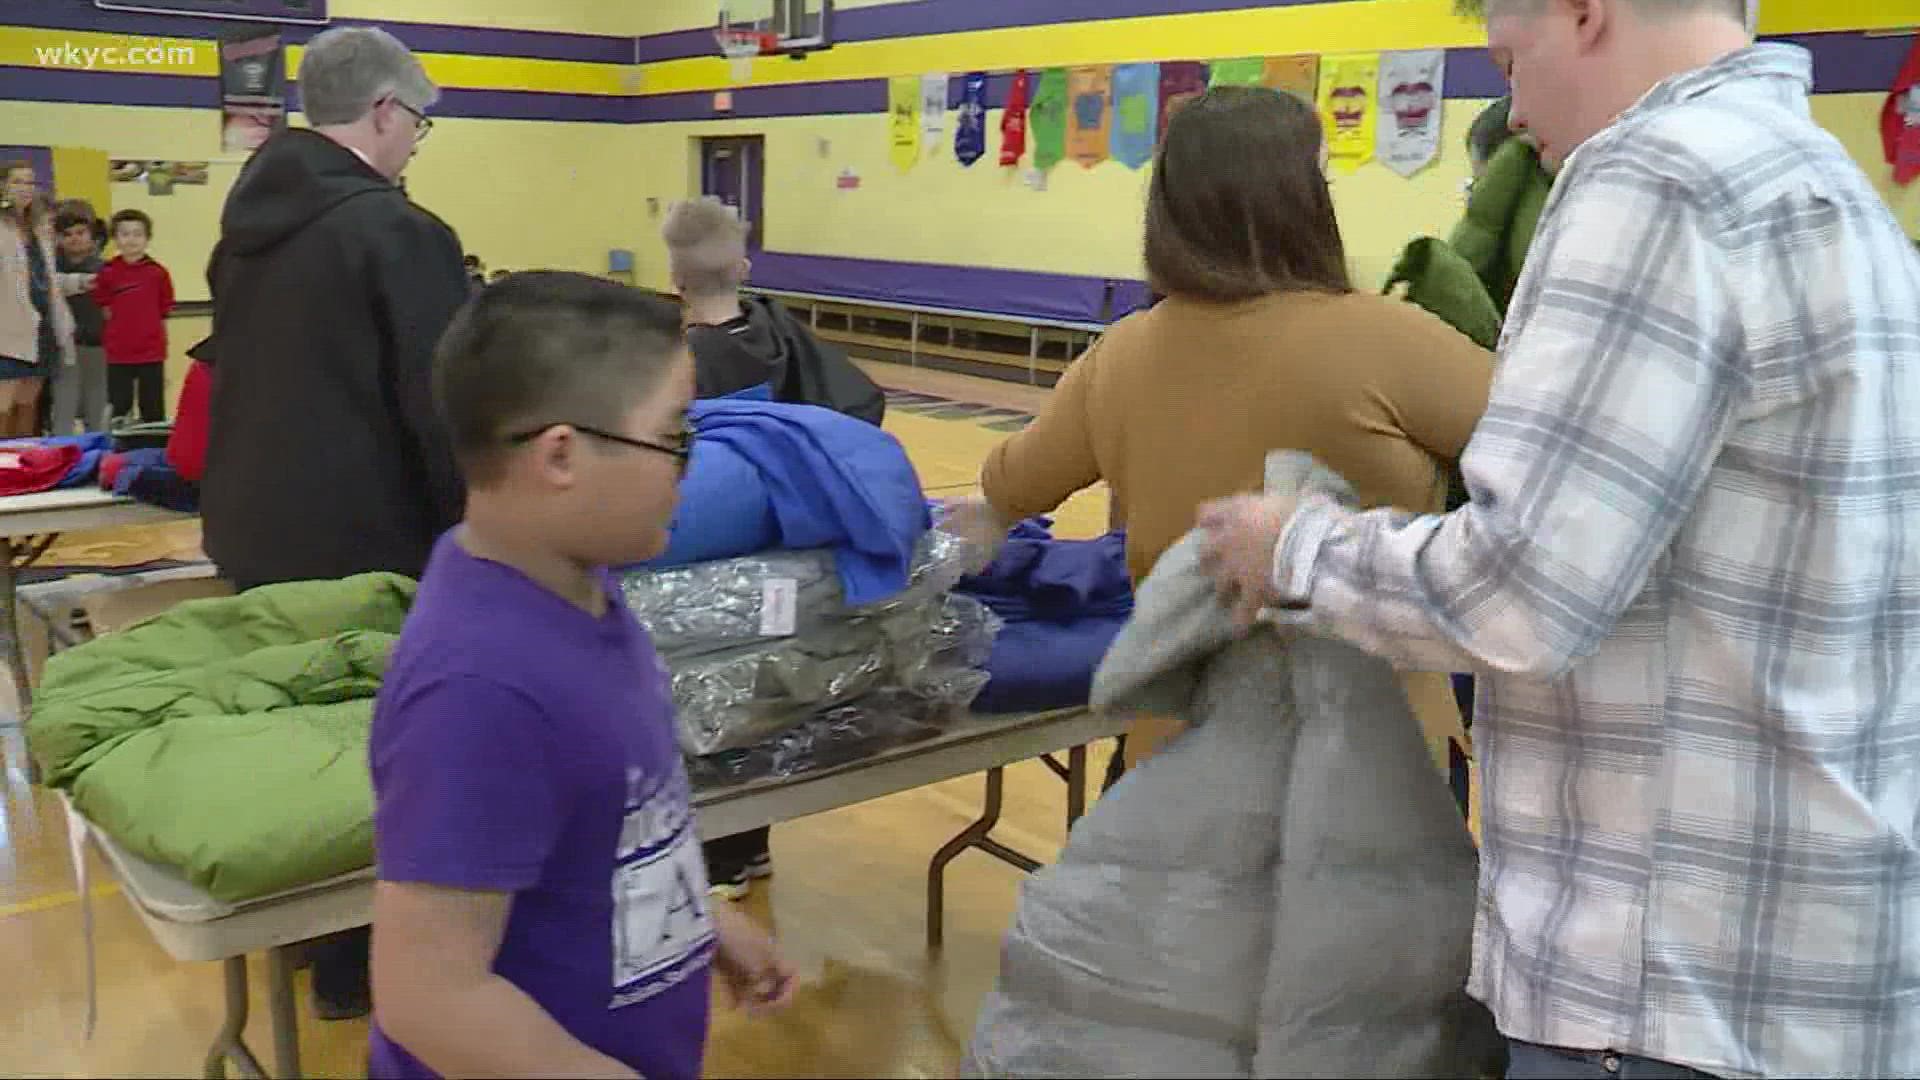 The charity began its annual distribution to schools with more coats than usual this year, and without one of its most notable figures.